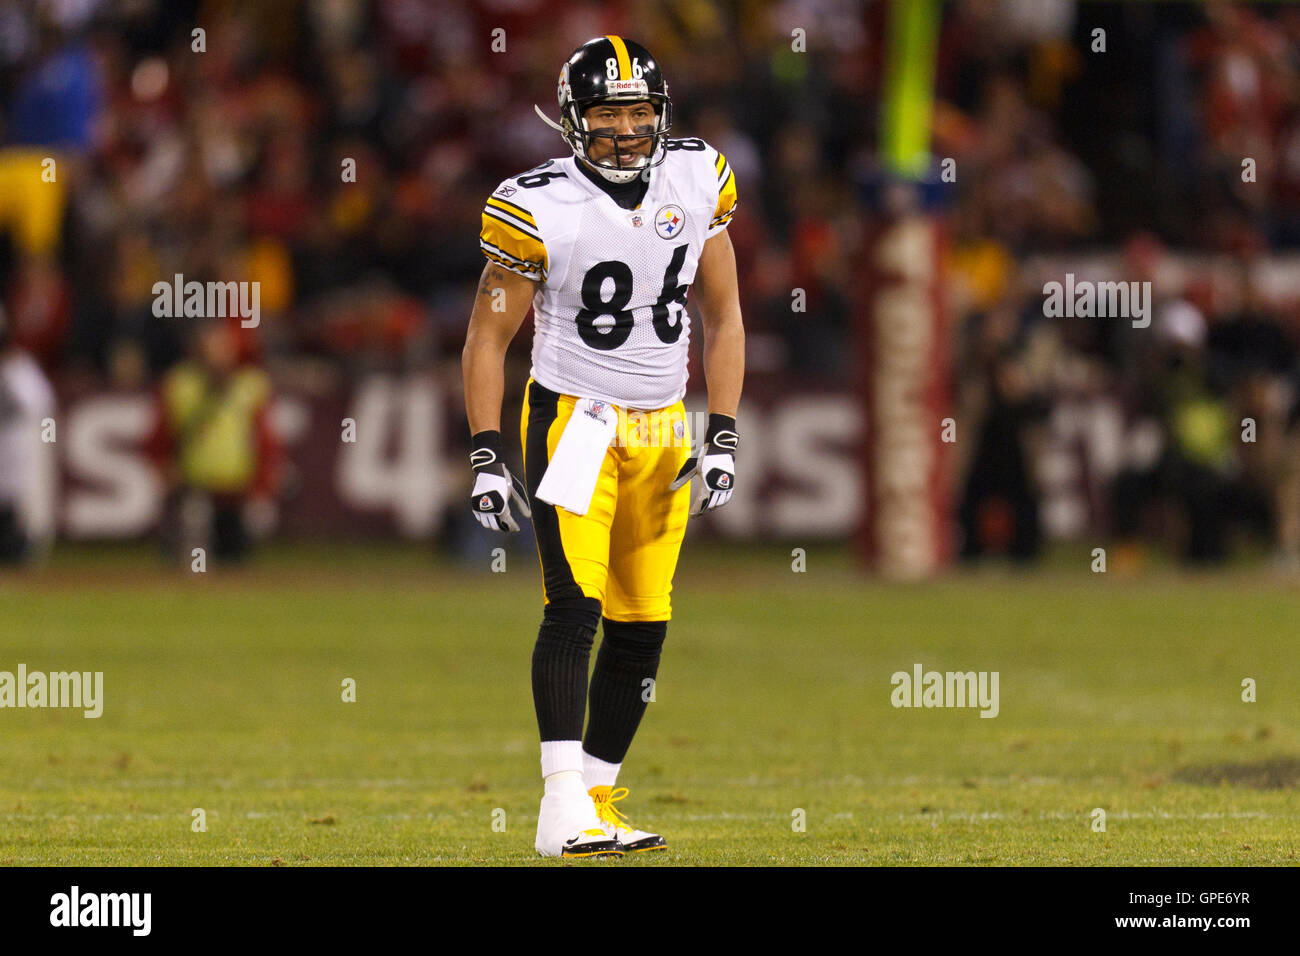 Dec 19, 2011; San Francisco, CA, USA; Pittsburgh Steelers wide receiver Hines Ward (86) lines up for a play against the San Francisco 49ers during the second quarter at Candlestick Park. San Francisco defeated Pittsburgh 20-3. Stock Photo